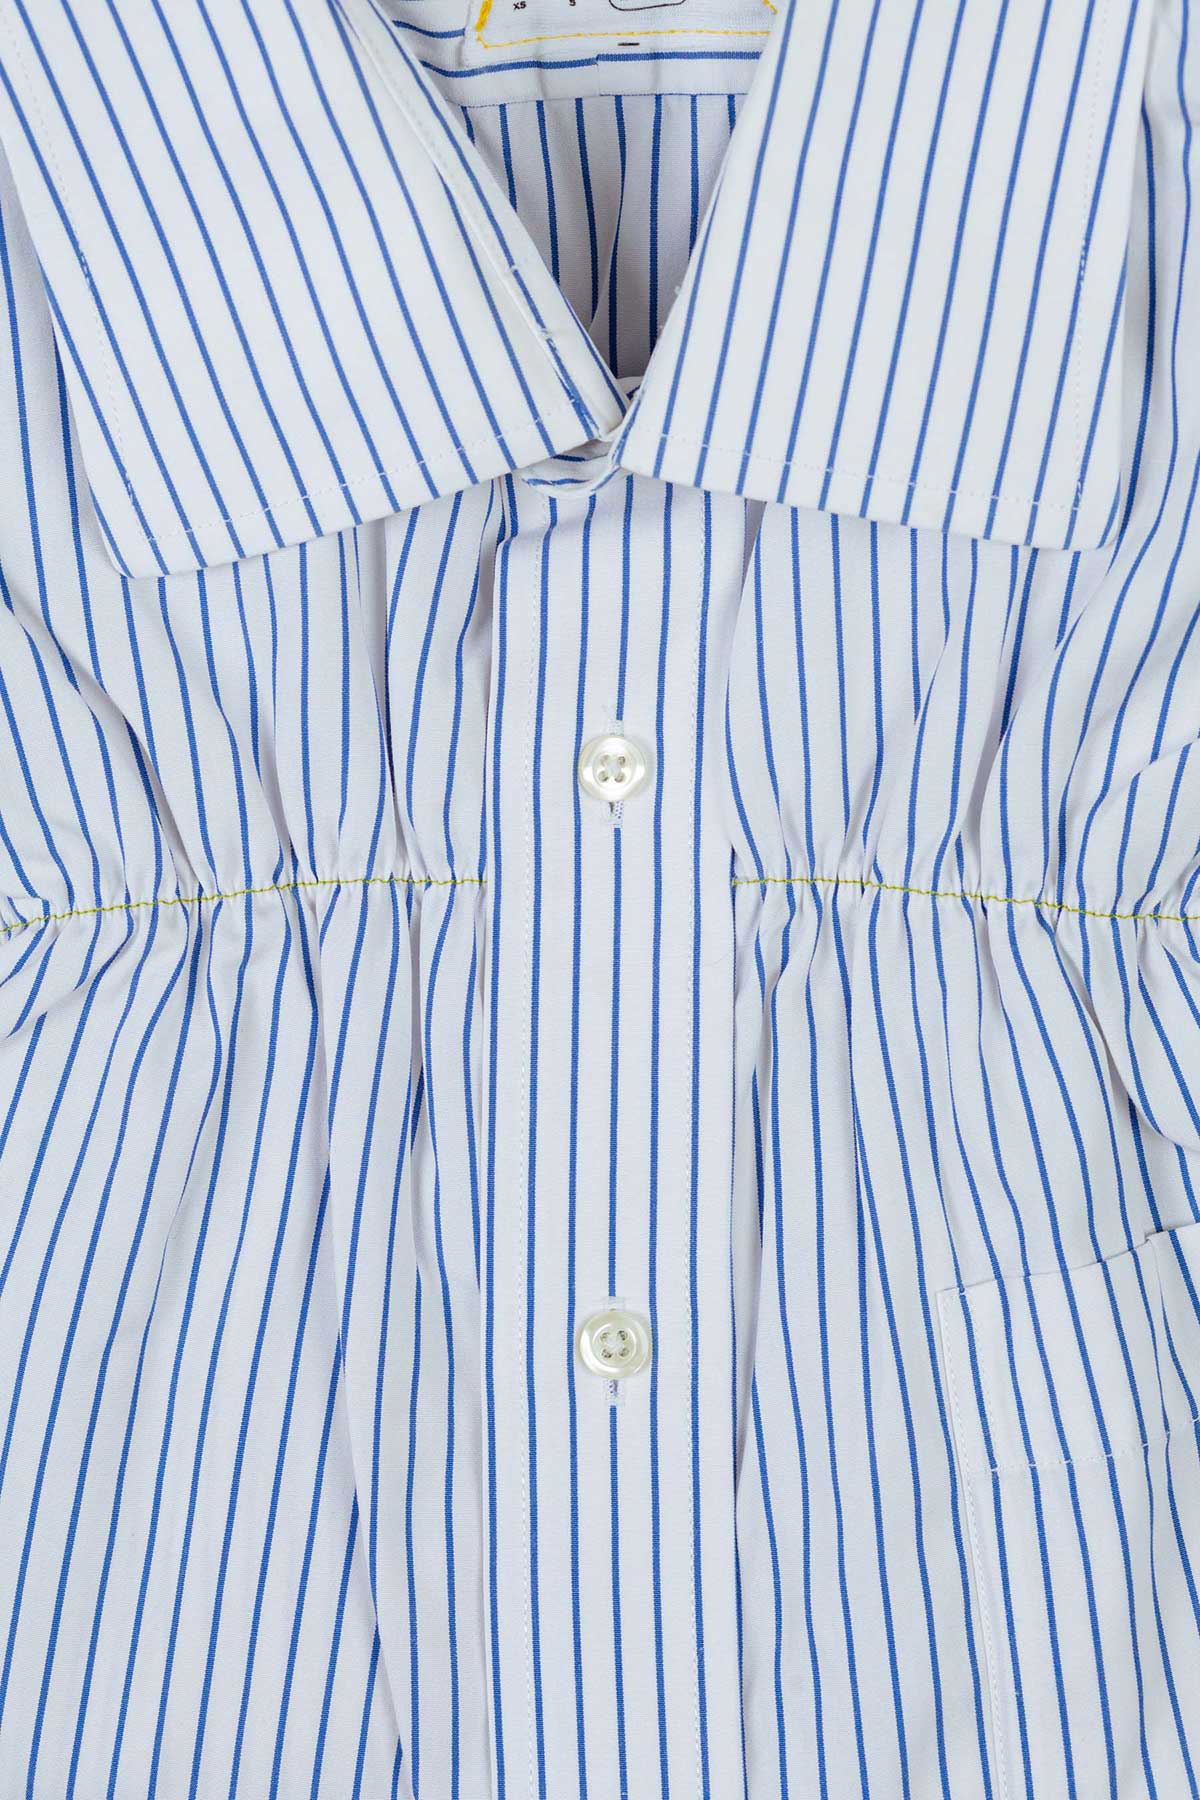 blue and white striped shirt with yellow topstitching ruching detail